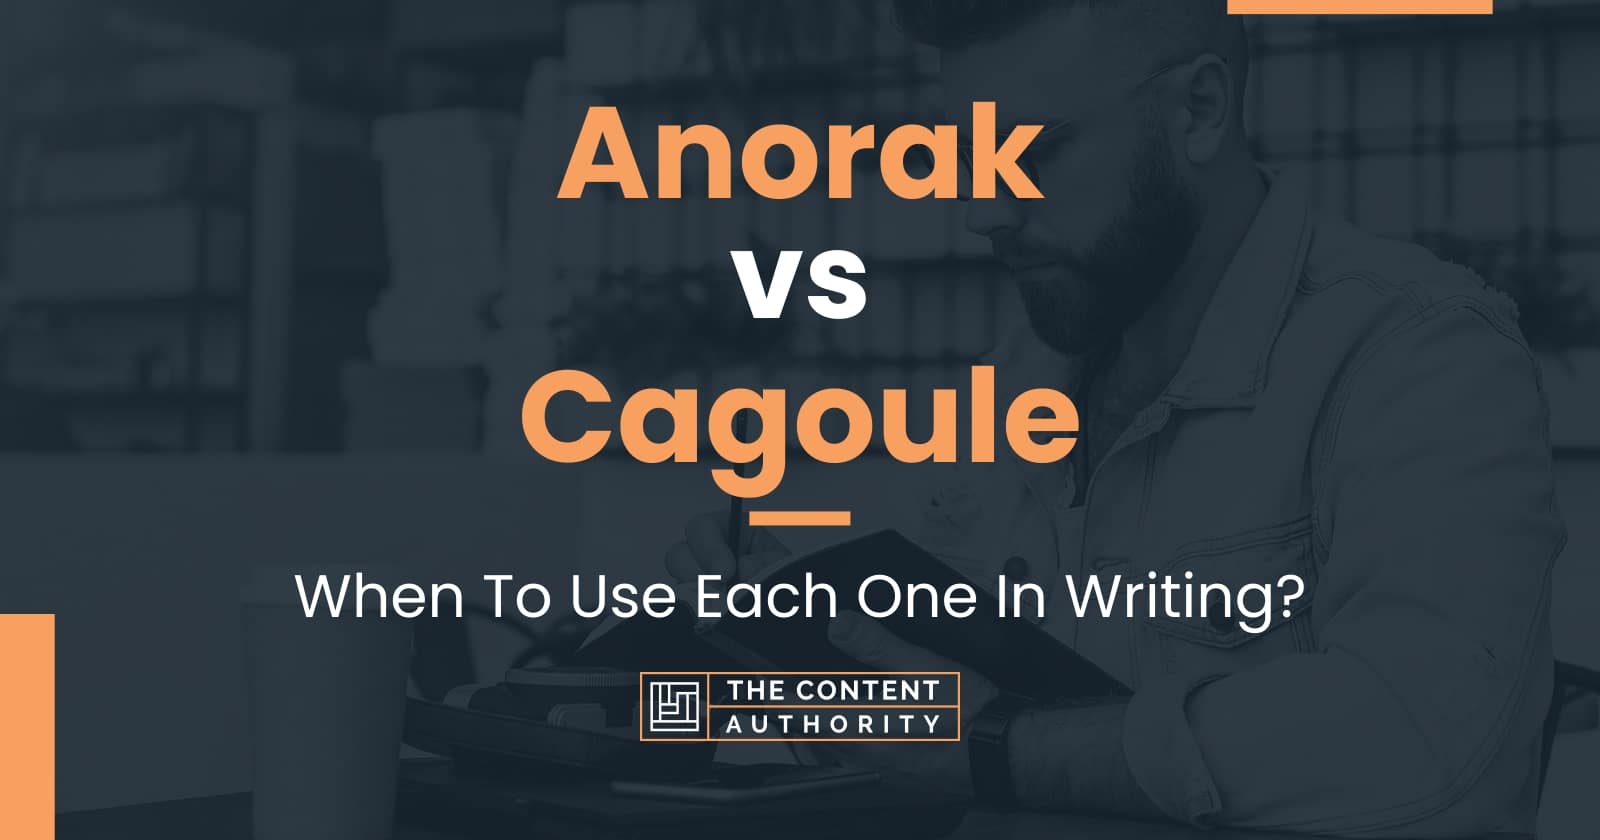 Anorak vs Cagoule: When To Use Each One In Writing?